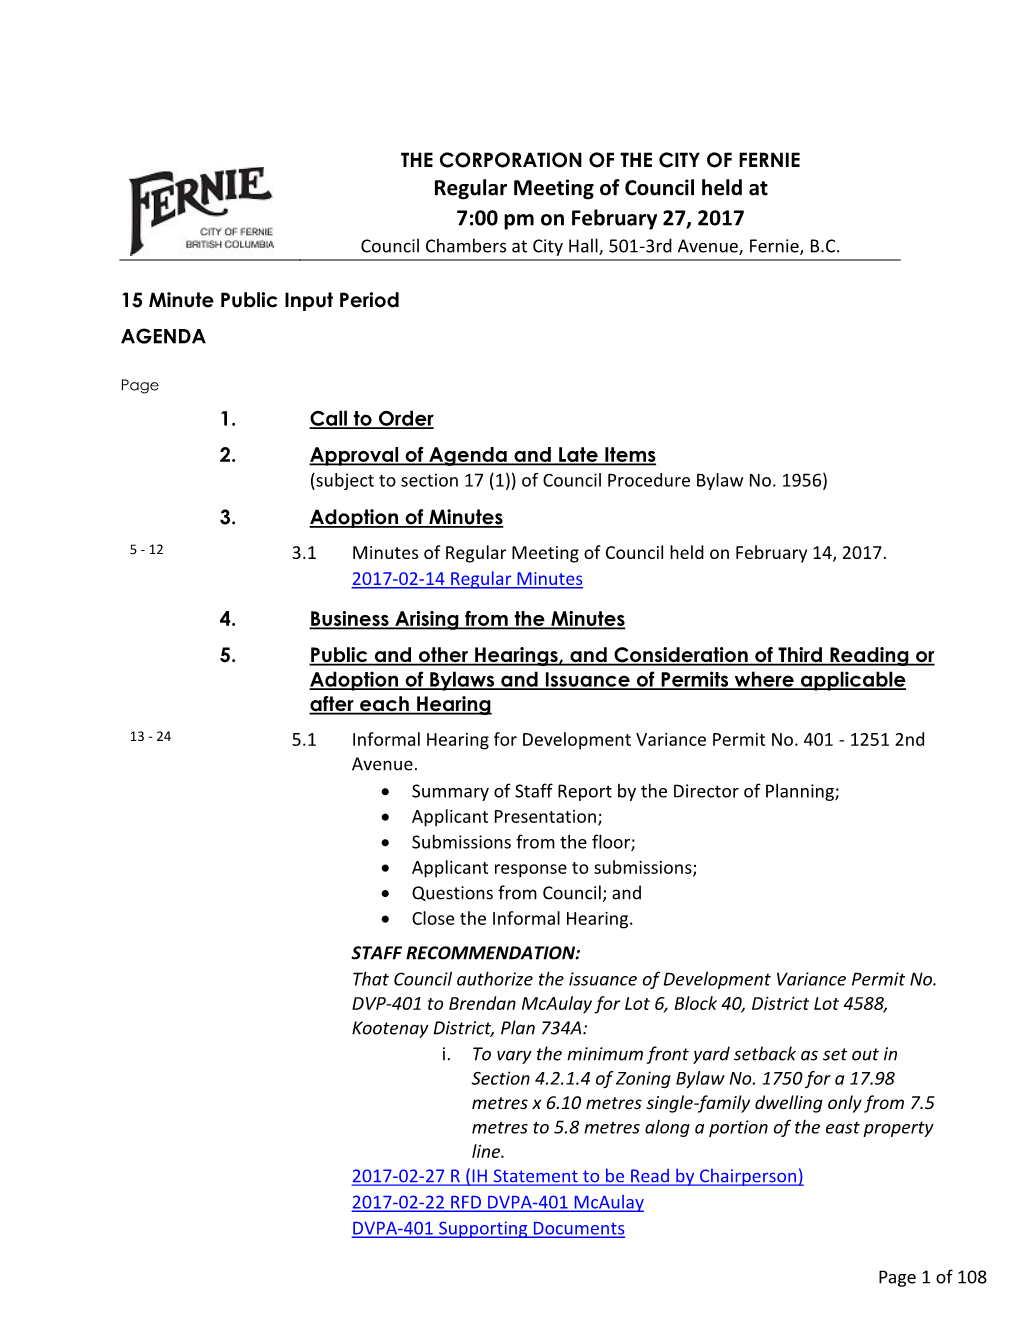 Regular Meeting of Council Held at 7:00 Pm on February 27, 2017 Council Chambers at City Hall, 501-3Rd Avenue, Fernie, B.C